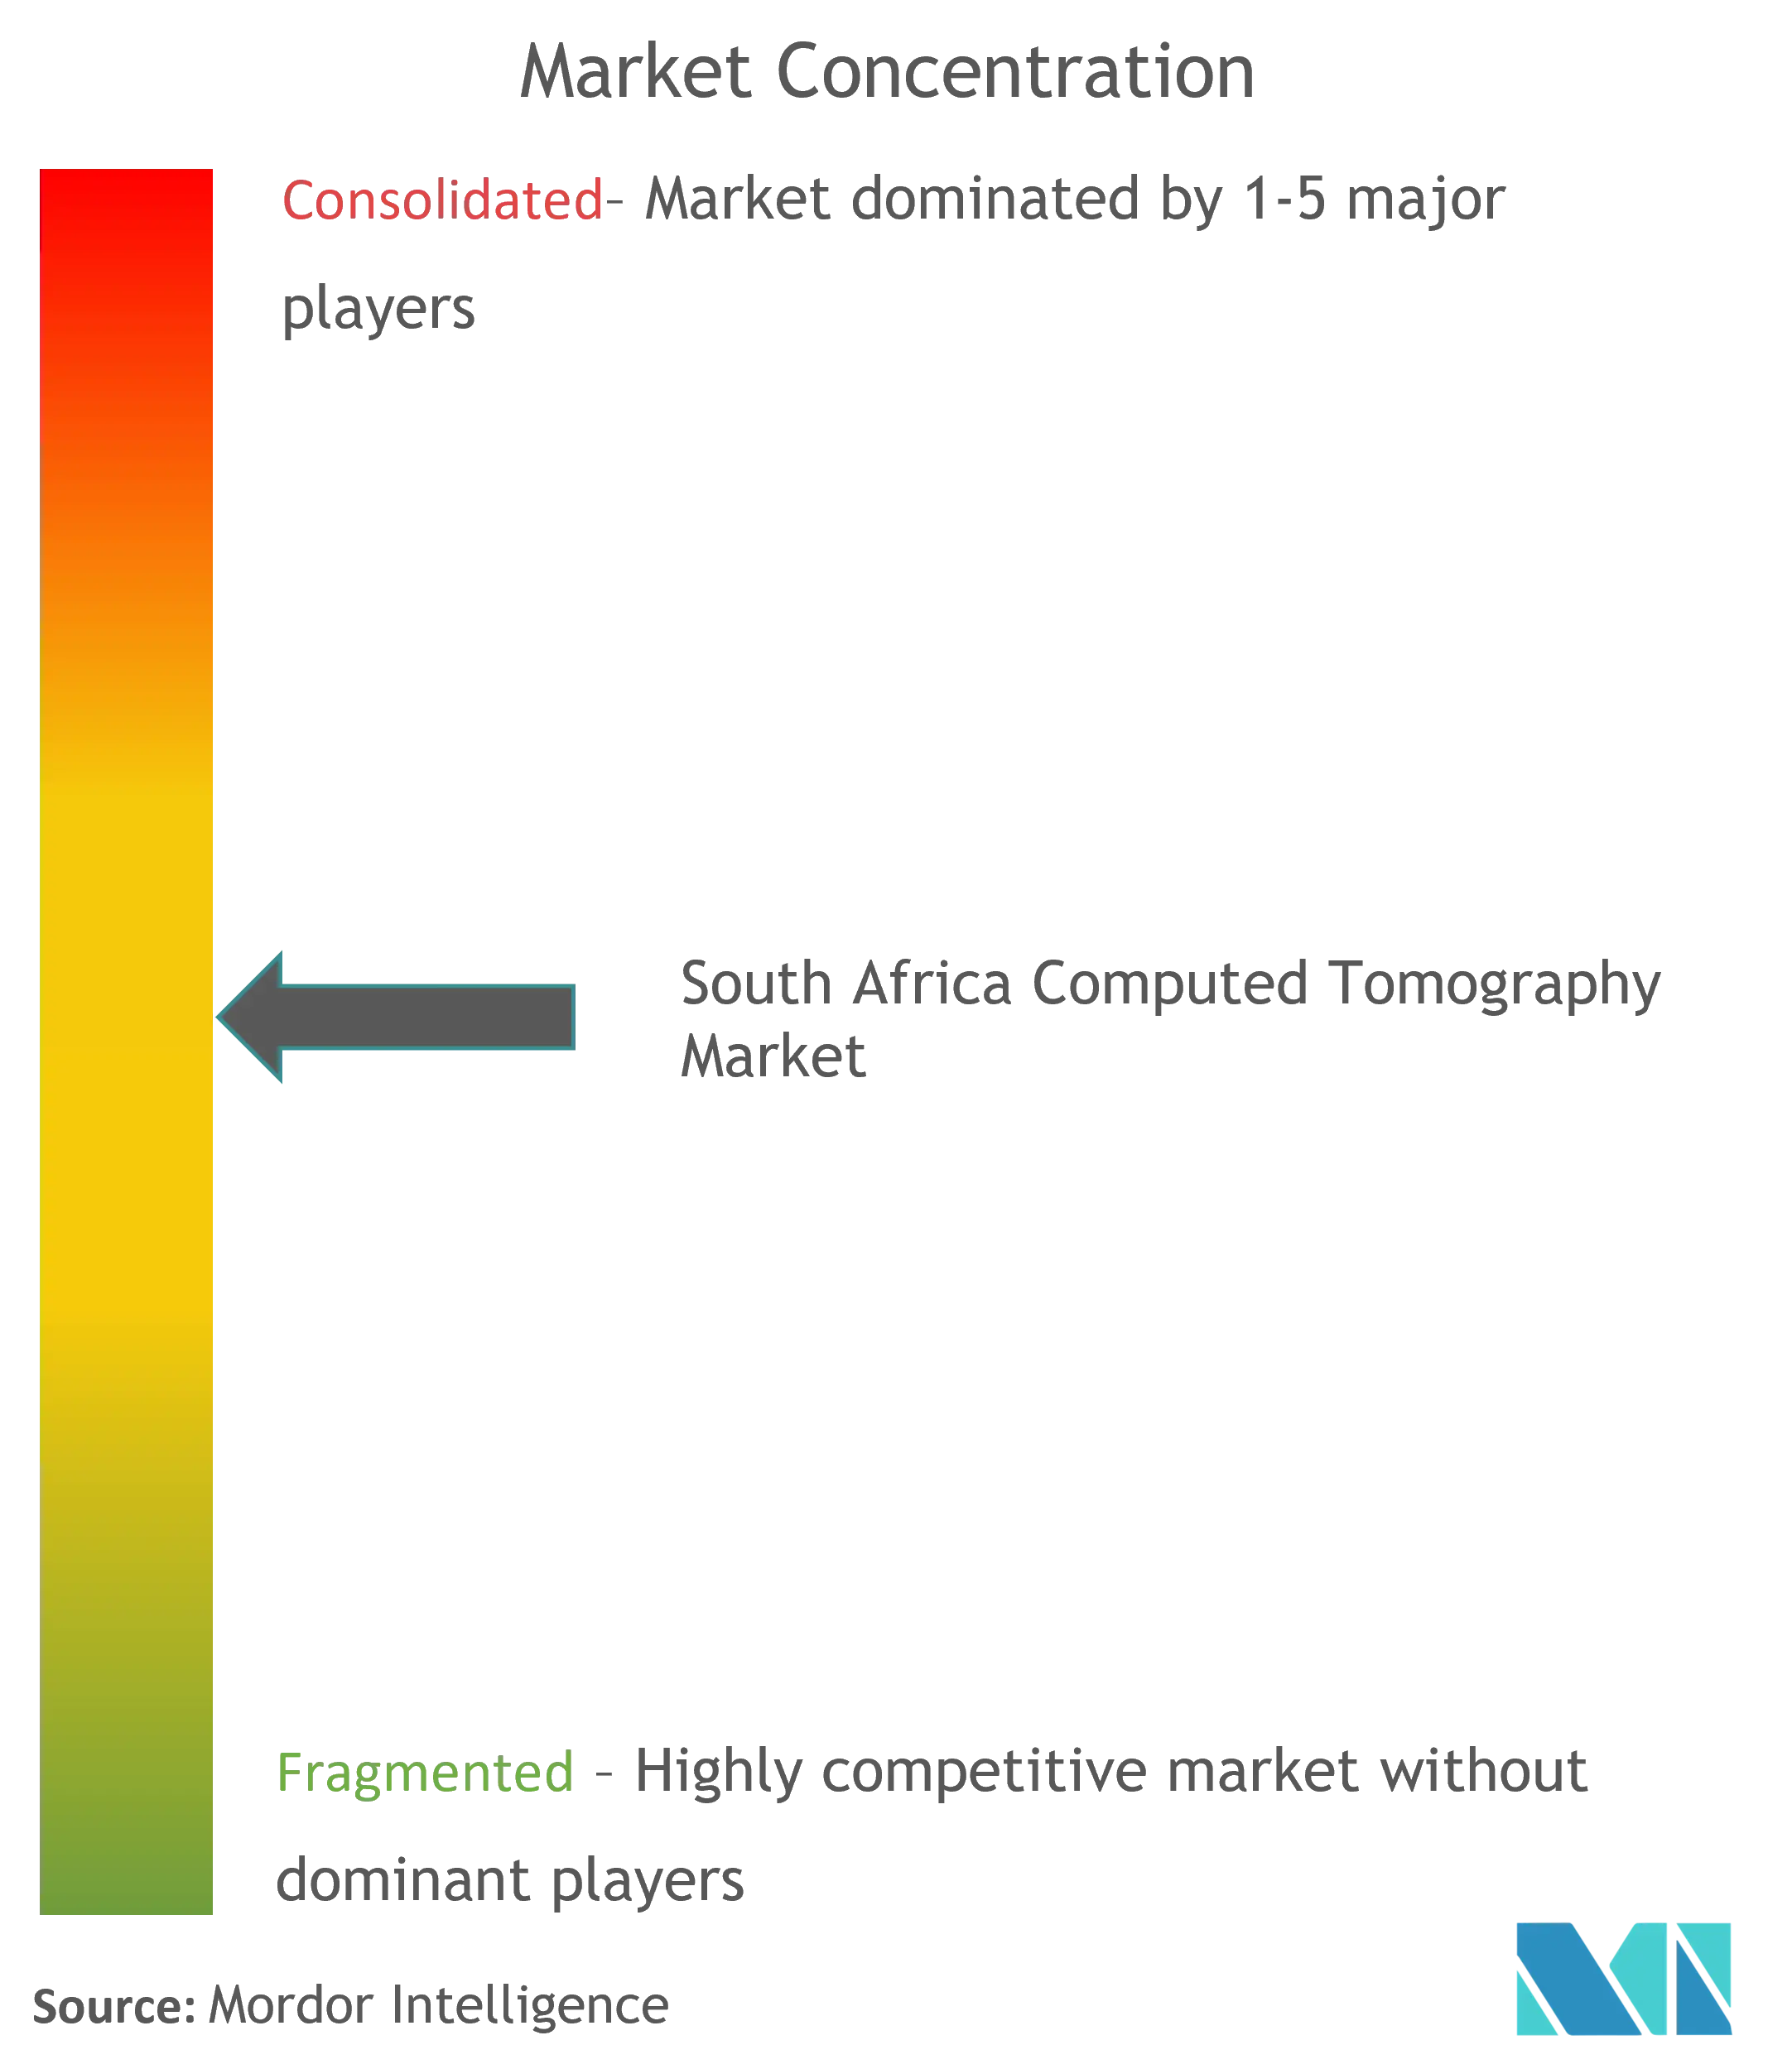 South Africa Computed Tomography Market Concentration